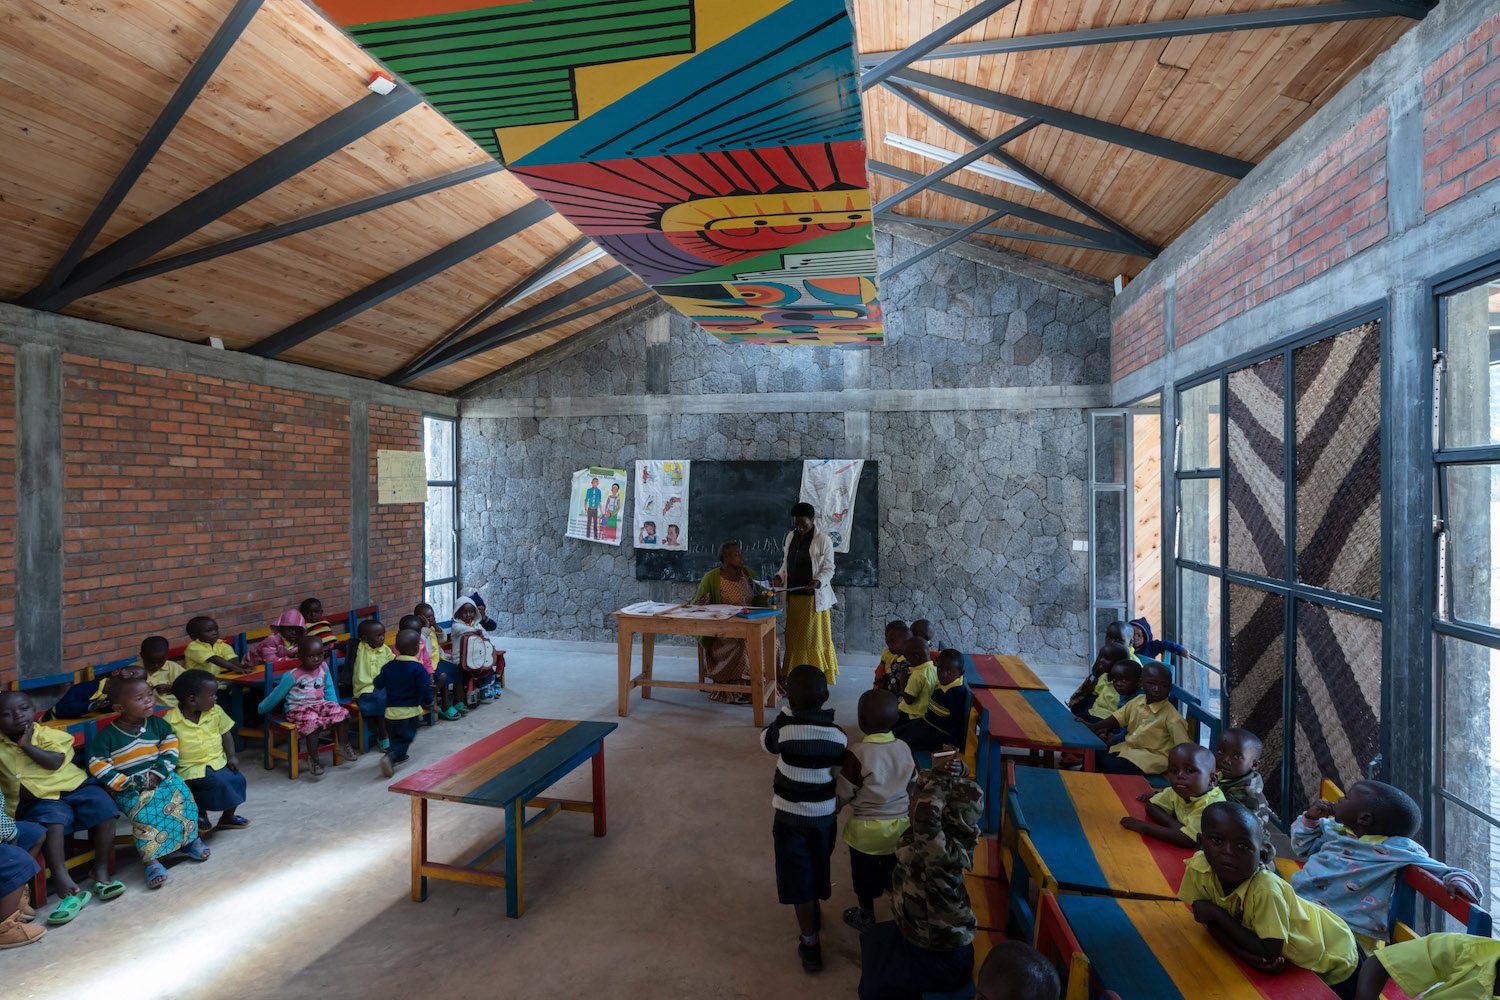 The new classrooms feature skylights and light-shelves that diffuse the incoming natural light, ensuring comfortable daylighting for reading and writing. | Iwan Baan (Limited Copyright)